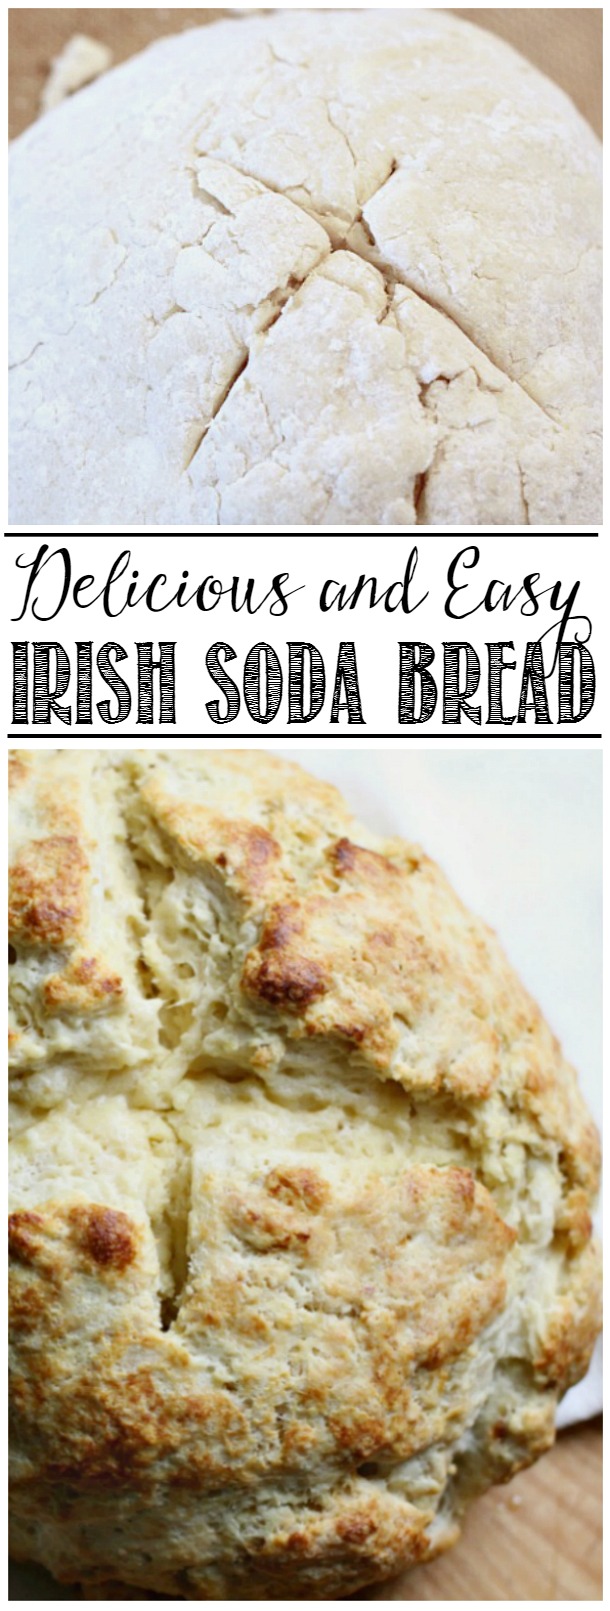 This delicious Irish soda bread is so easy to make with only 15 minutes of prep time! You can't beat fresh baked bread!